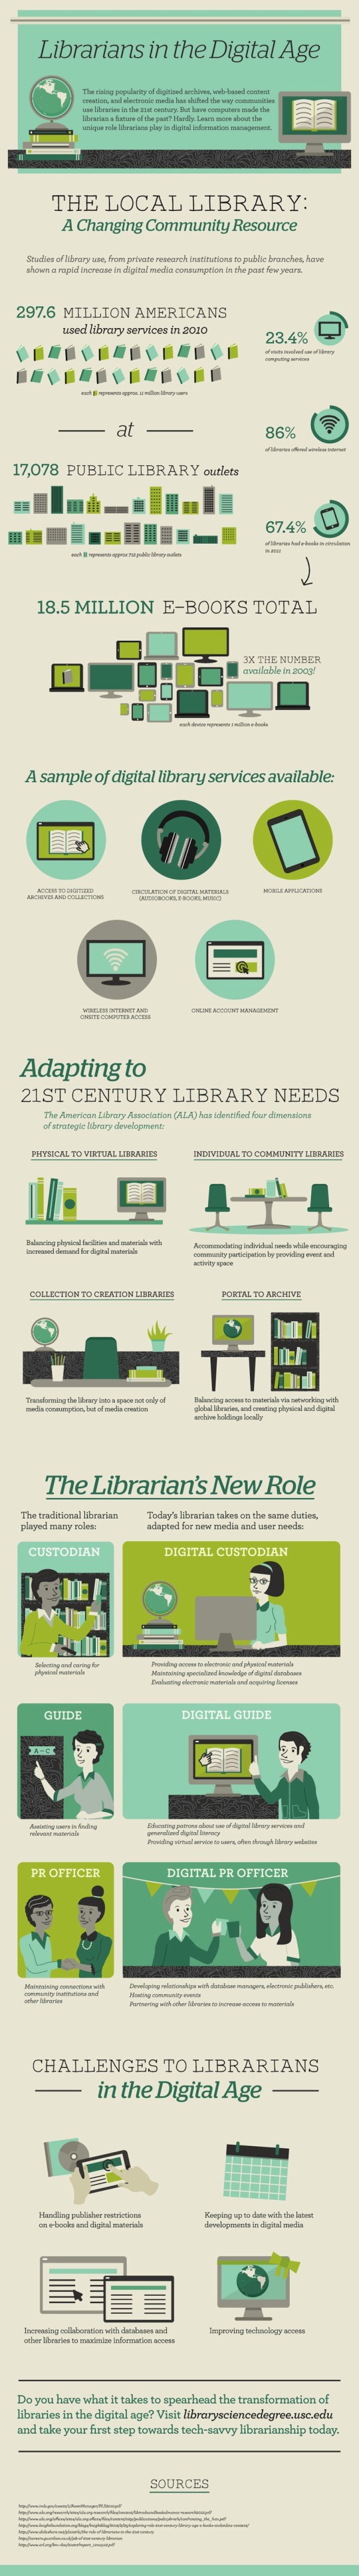 Librarians digital age - infographic